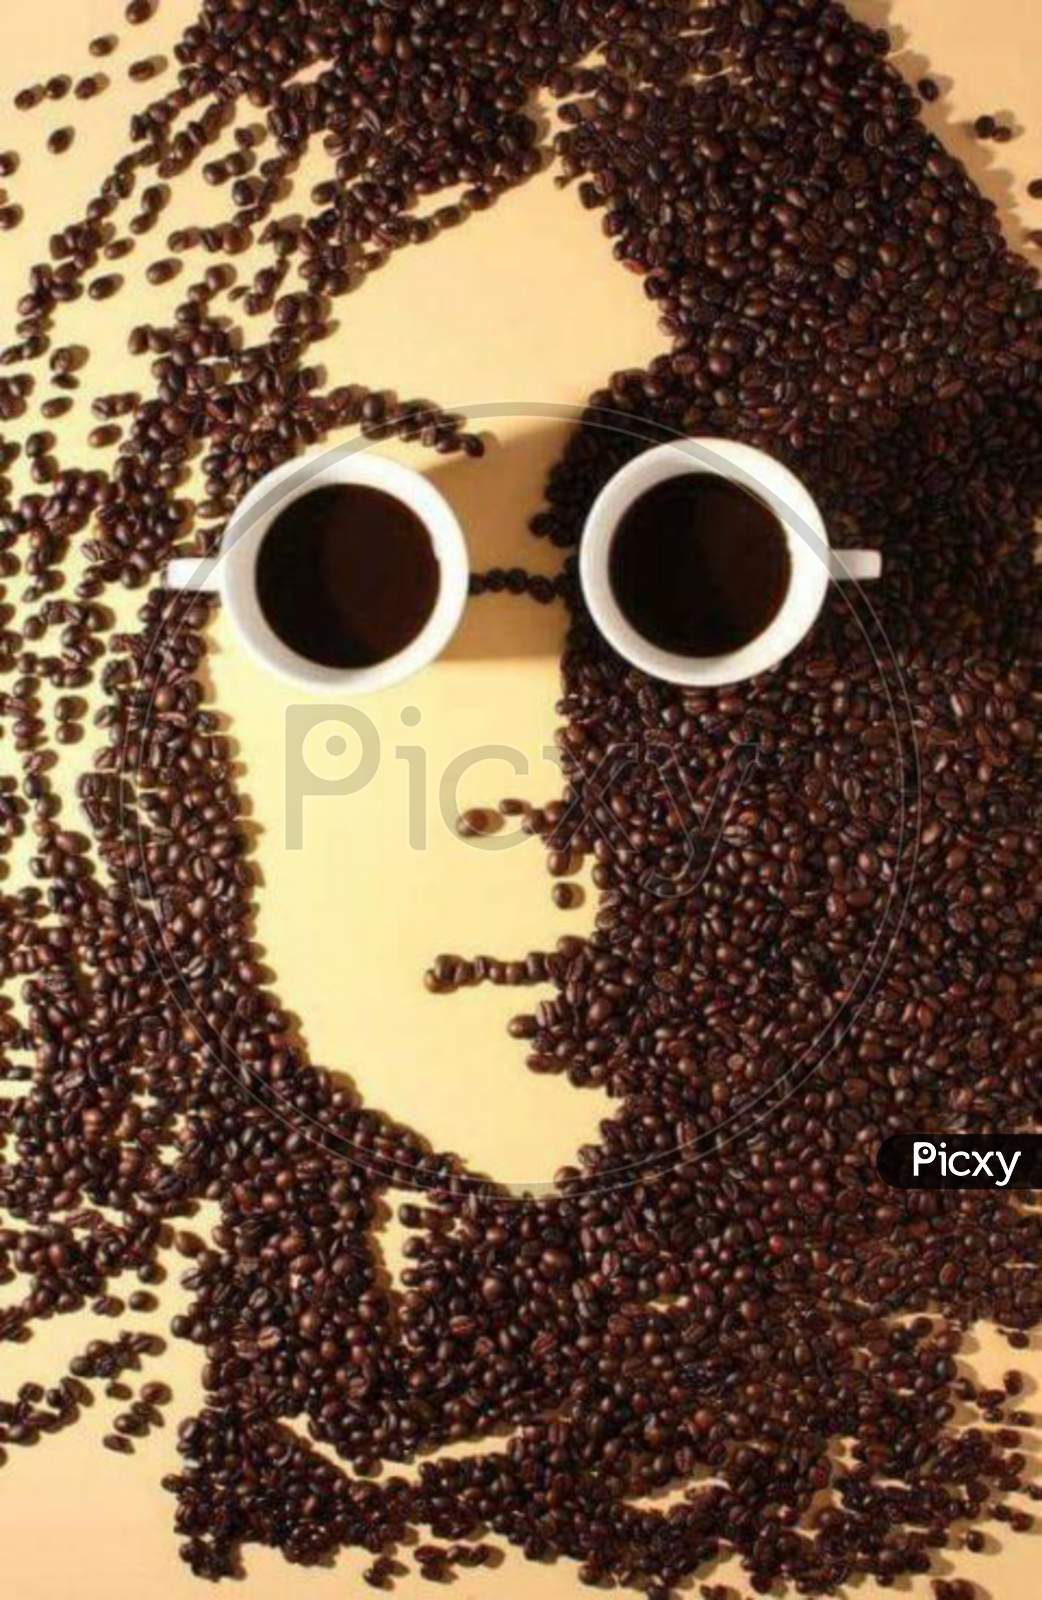 Coffee beans Art , Mans face in coffee beans and coffee mugs